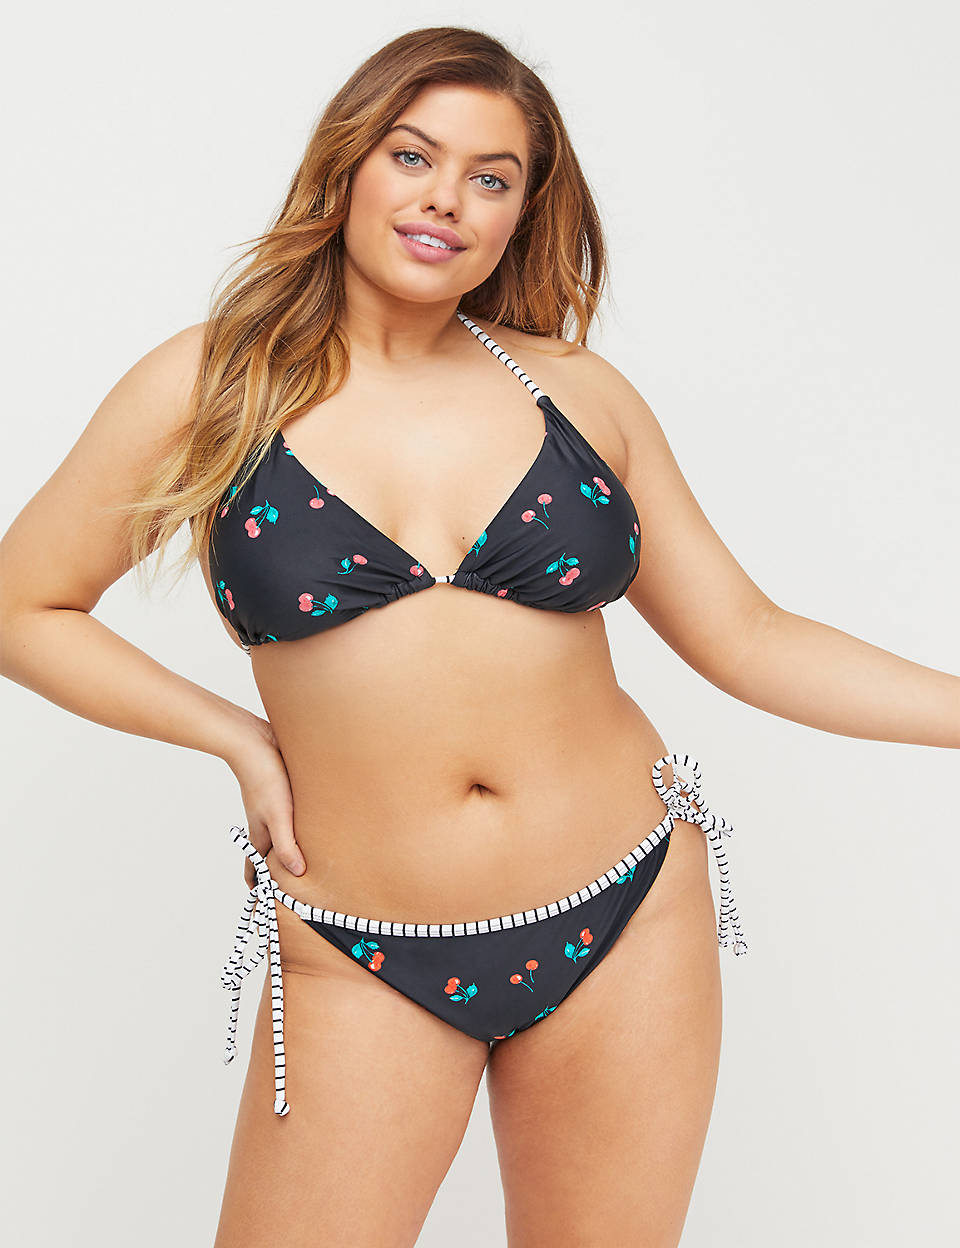 15 Super Cool Plus-Size Swimsuits for Summer - theFashionSpot